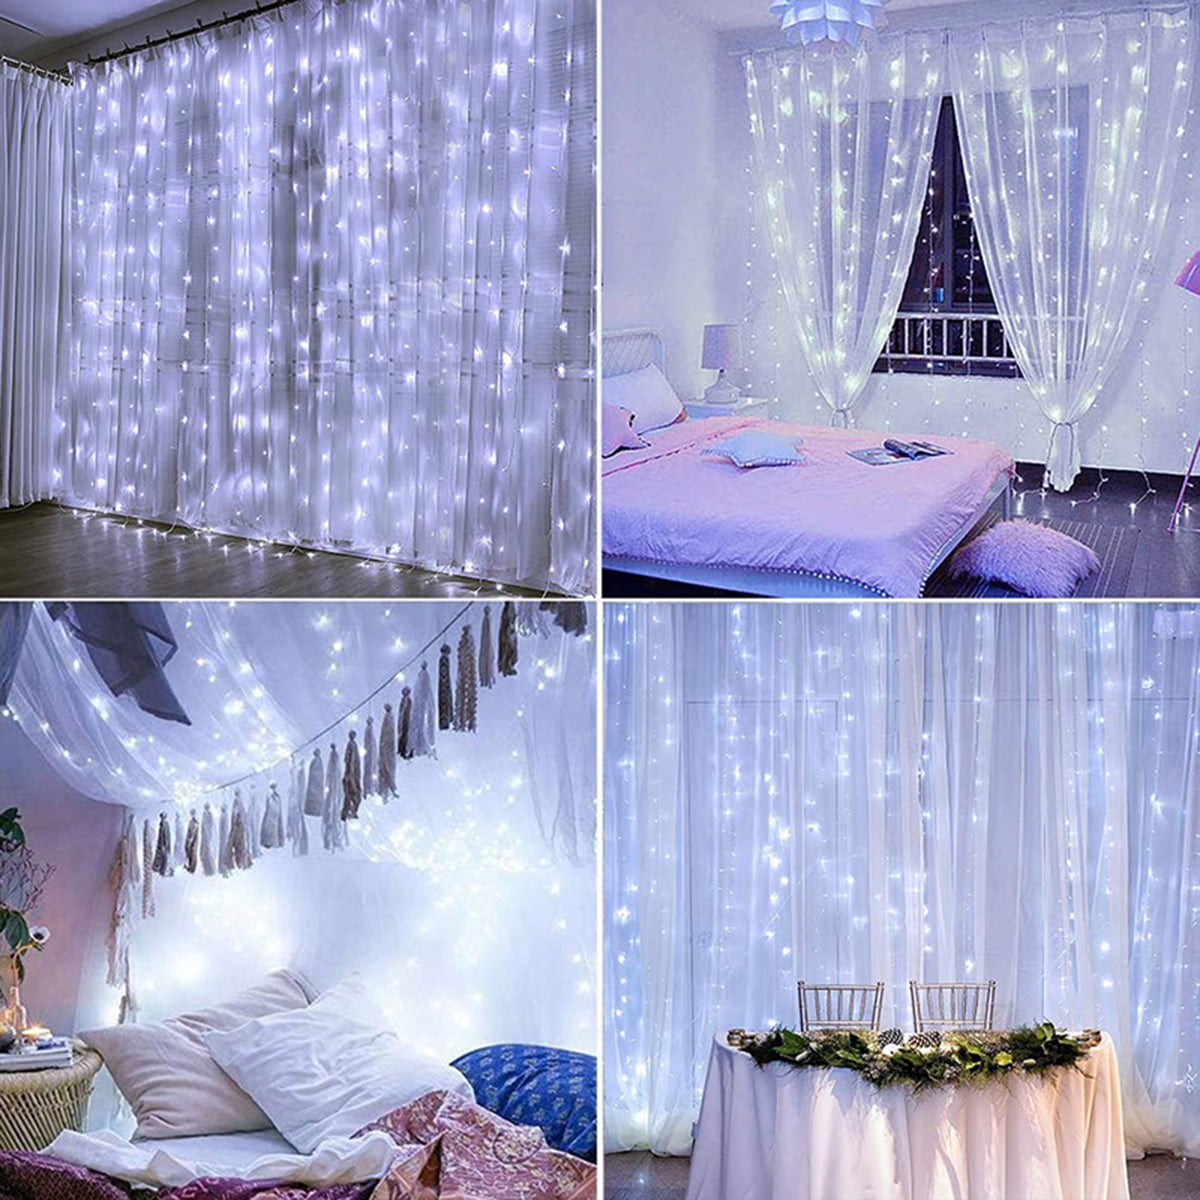 Details about   300 LED Curtain Fairy Hanging String Lights Christmas Wedding Party Home Decor 